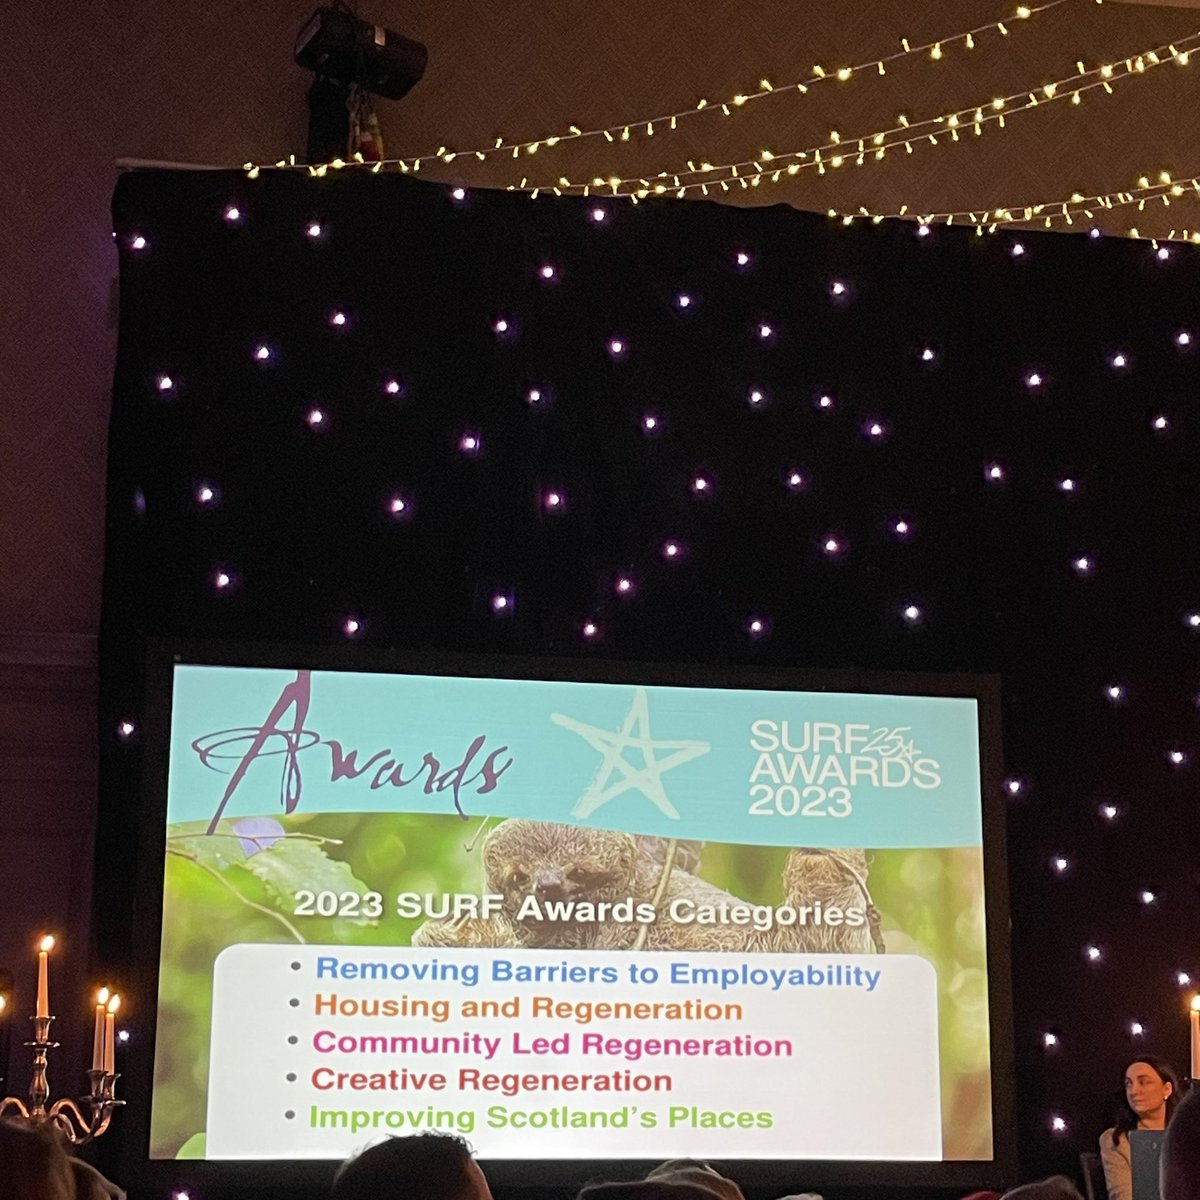 Incredible projects shortlisted - categories as seen below. Always an inspiring night. Delighted to get to meet so many folk regenerating places, and changing lives. #SURFAwards